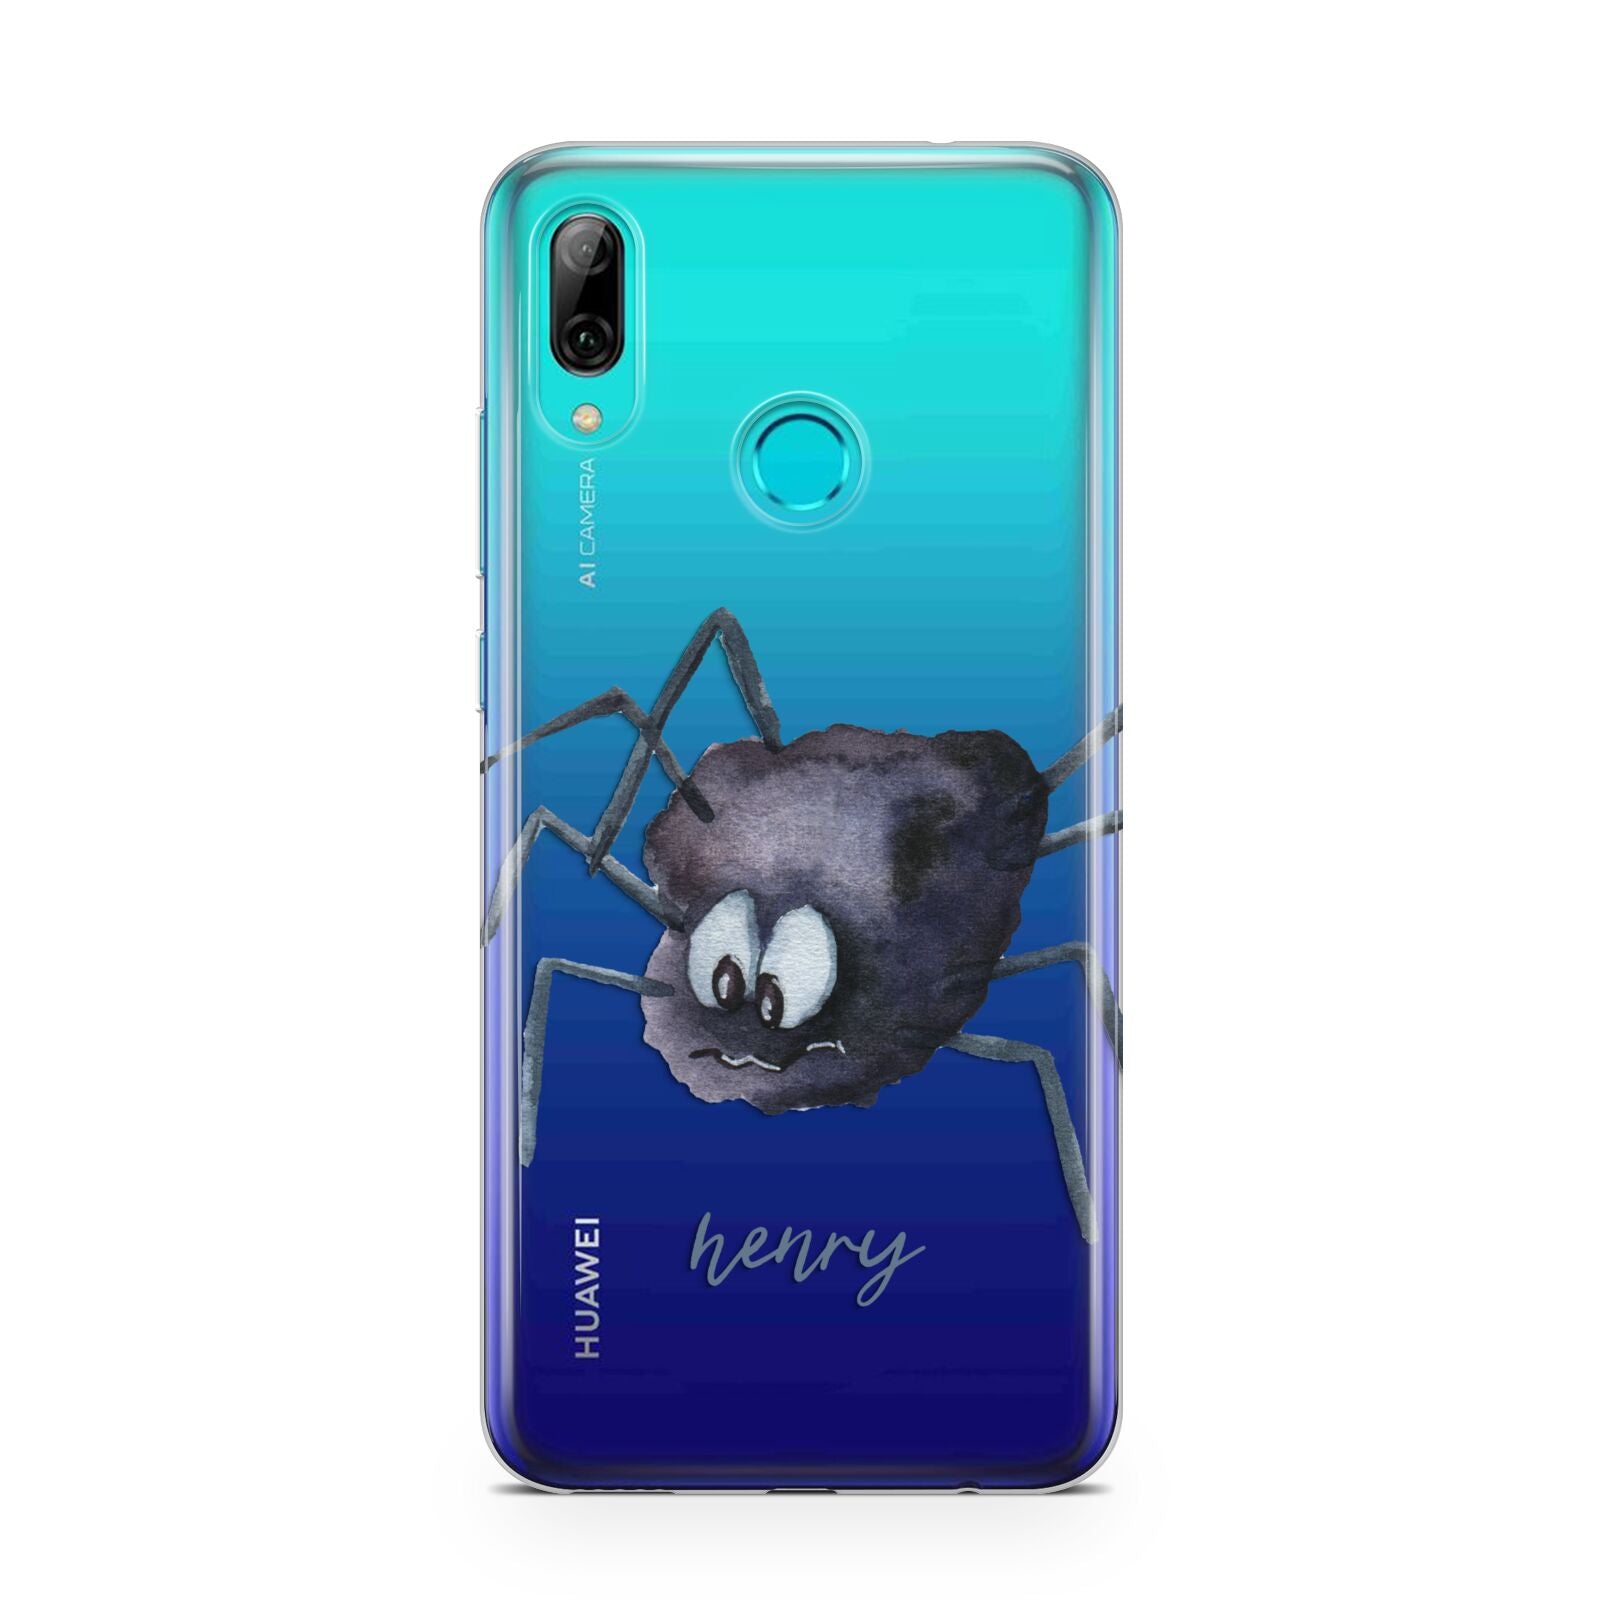 Scared Spider Personalised Huawei P Smart 2019 Case